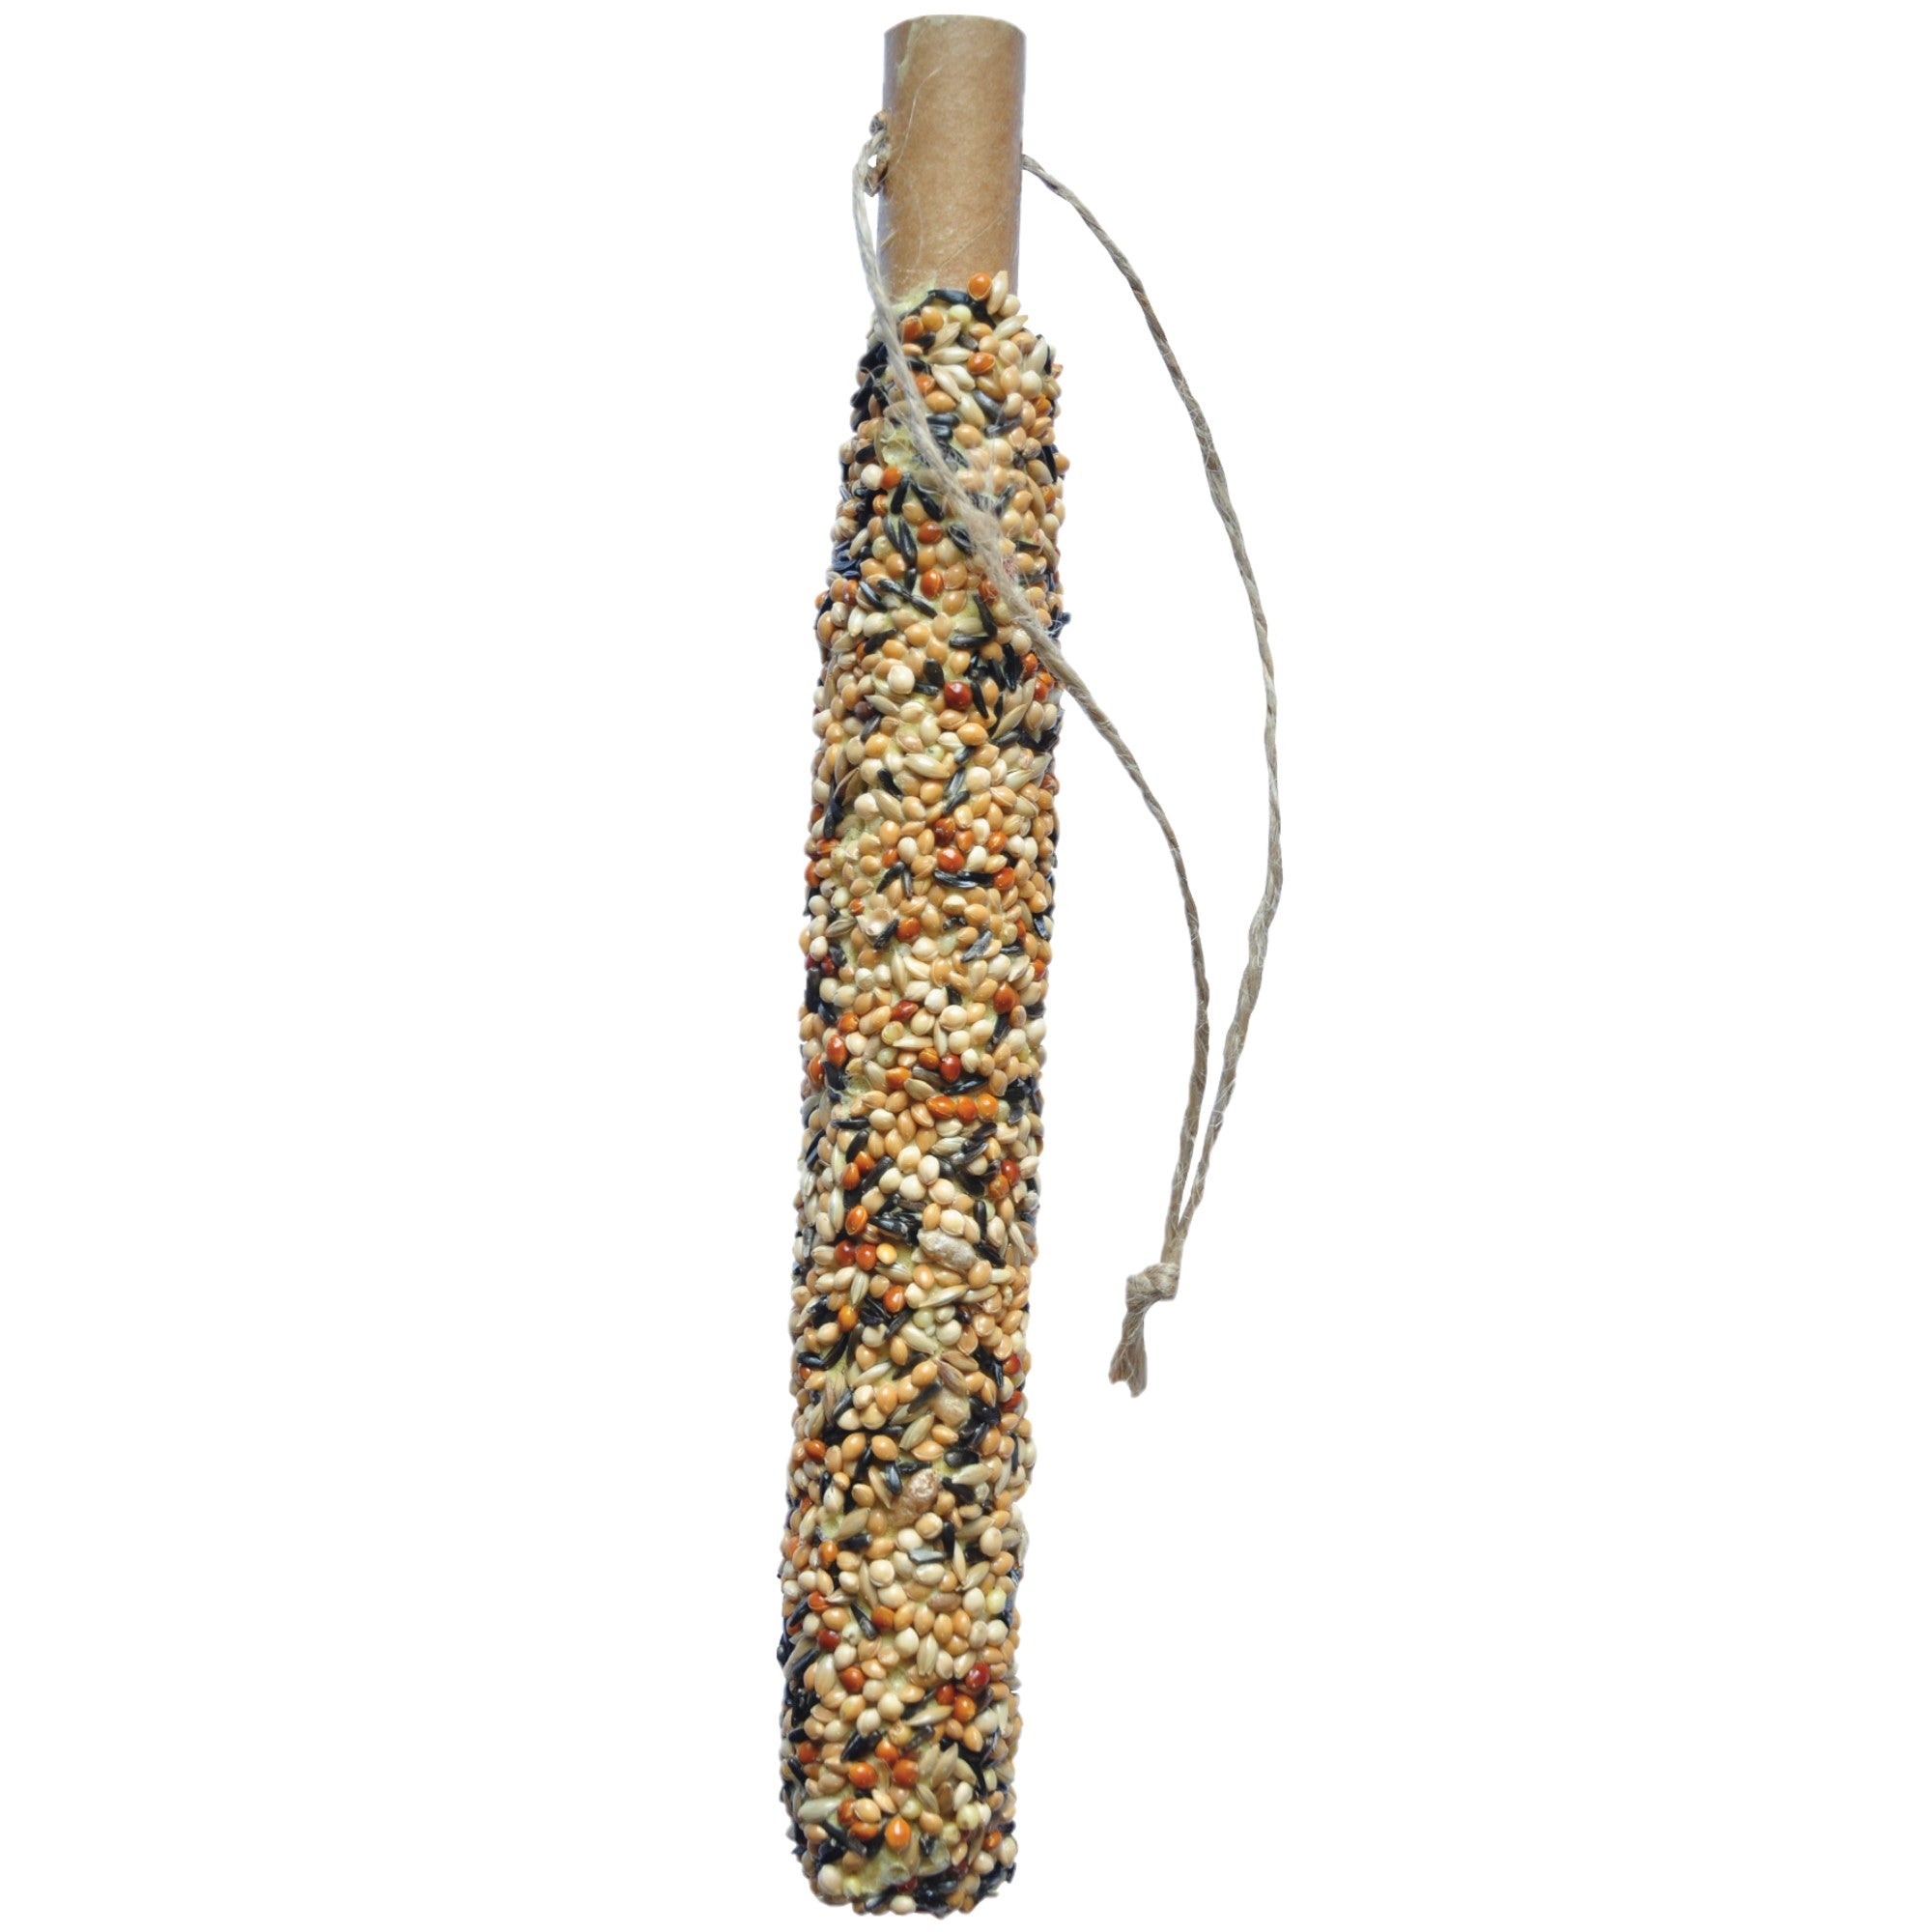 A & E Cage Smakers Wild Bird Seed Stick for Finches, 1.76oz